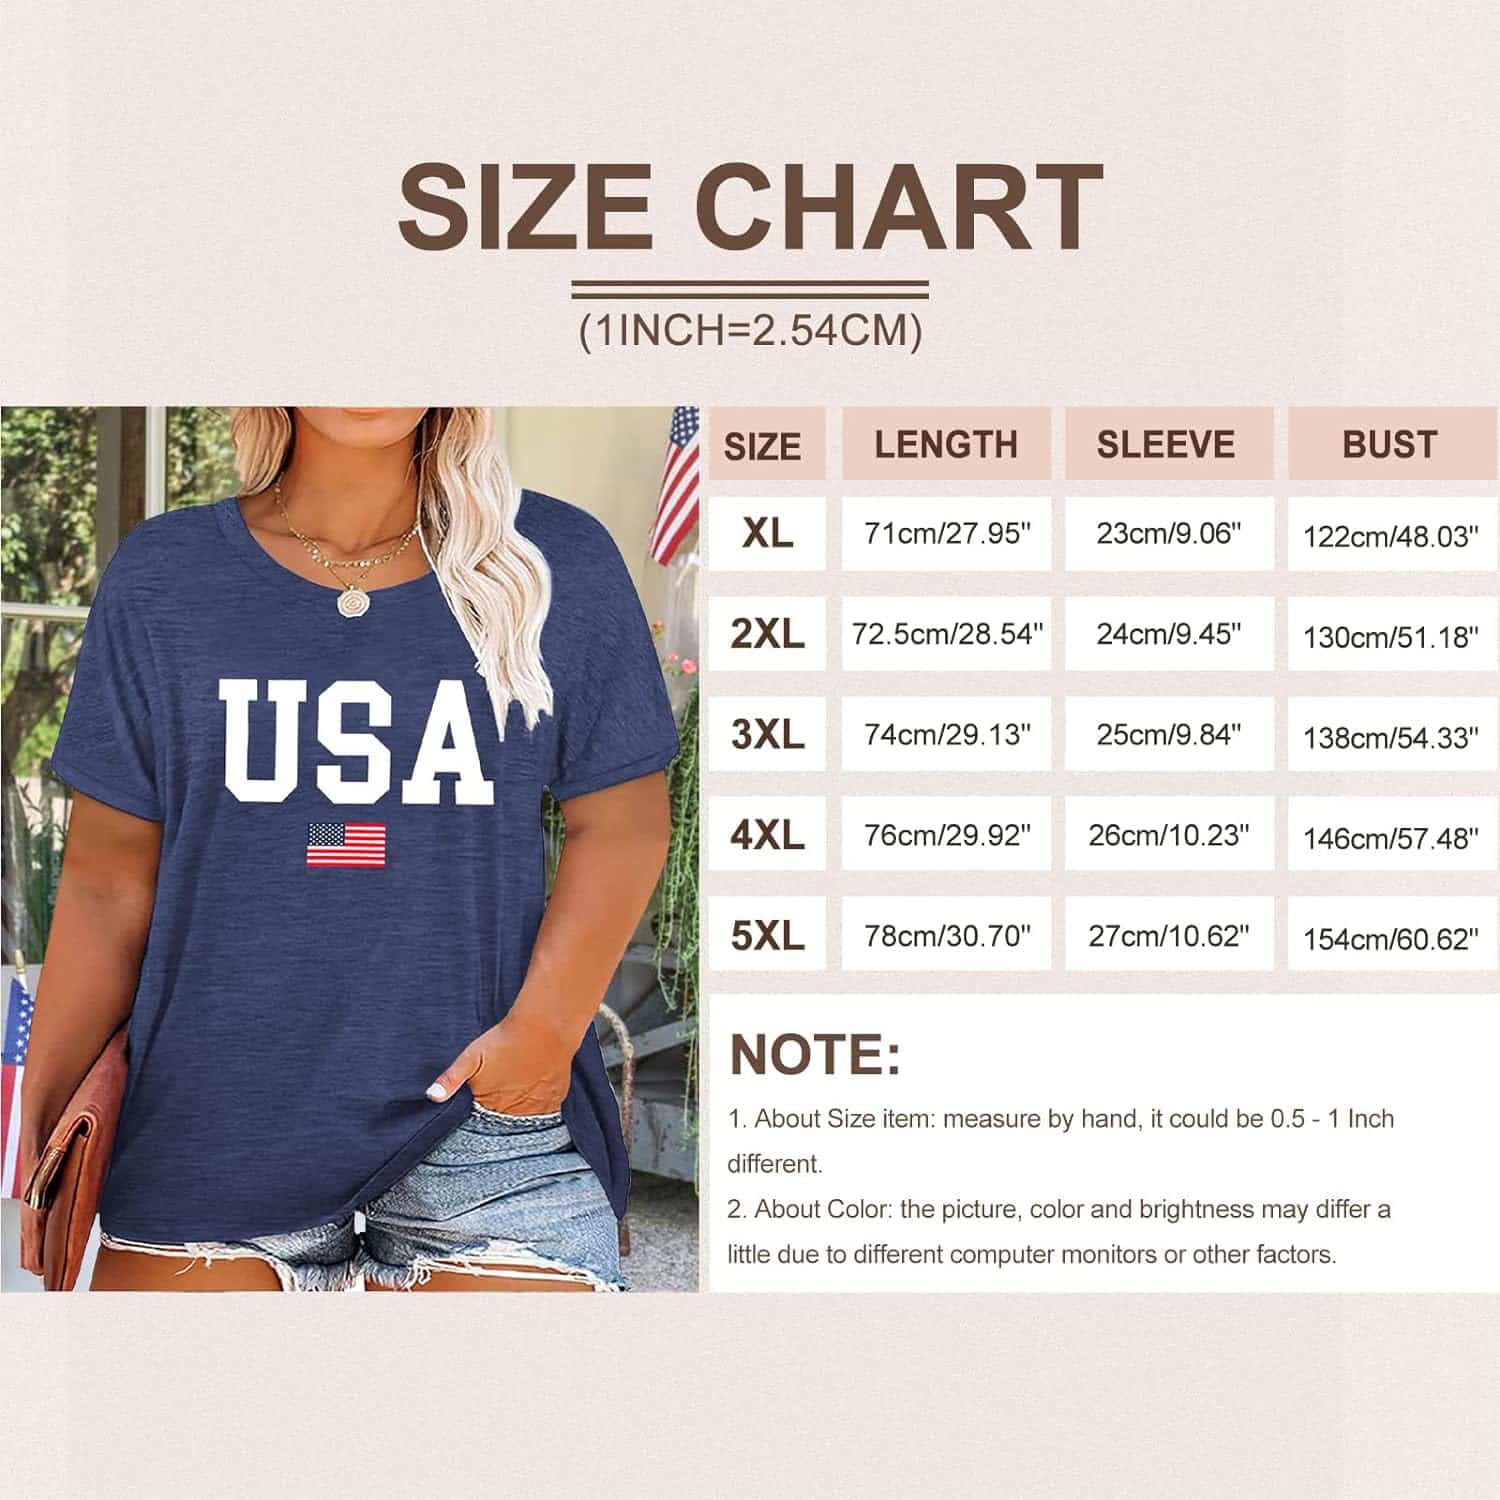 Plus Size USA Flag Shirt for Women 4th of July: A Patriotic Fashion Statement